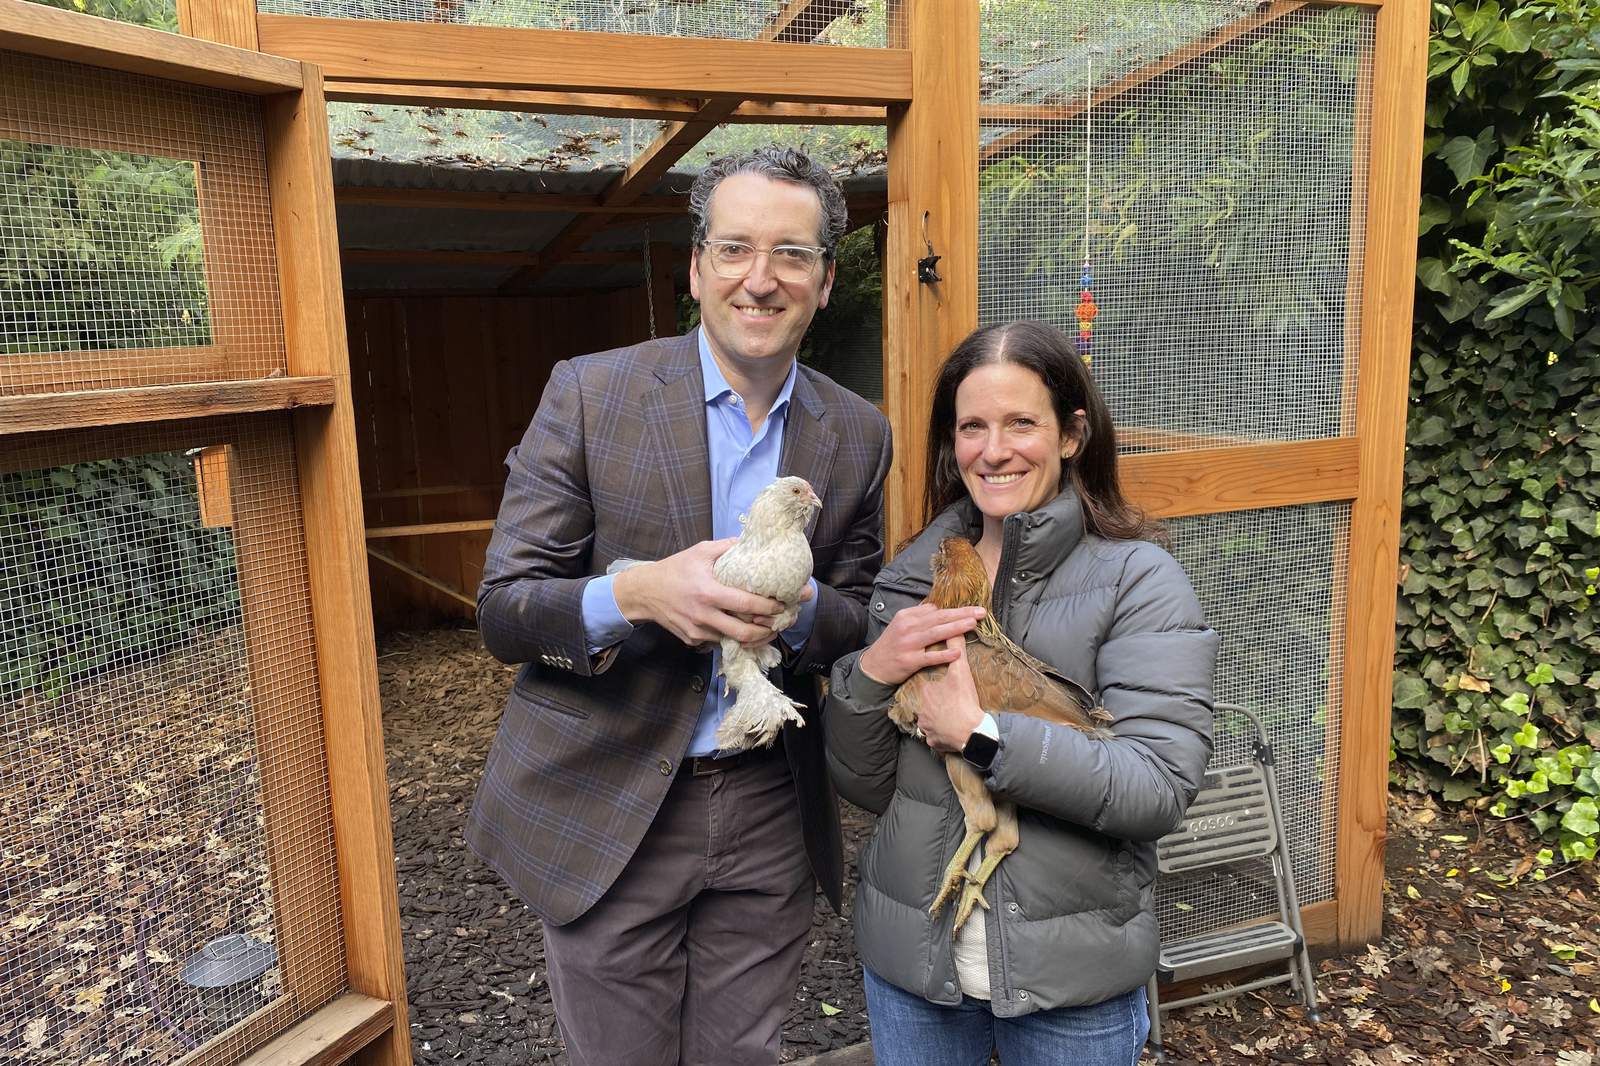 COVID cluckers: Pandemic feeds demand for backyard chickens